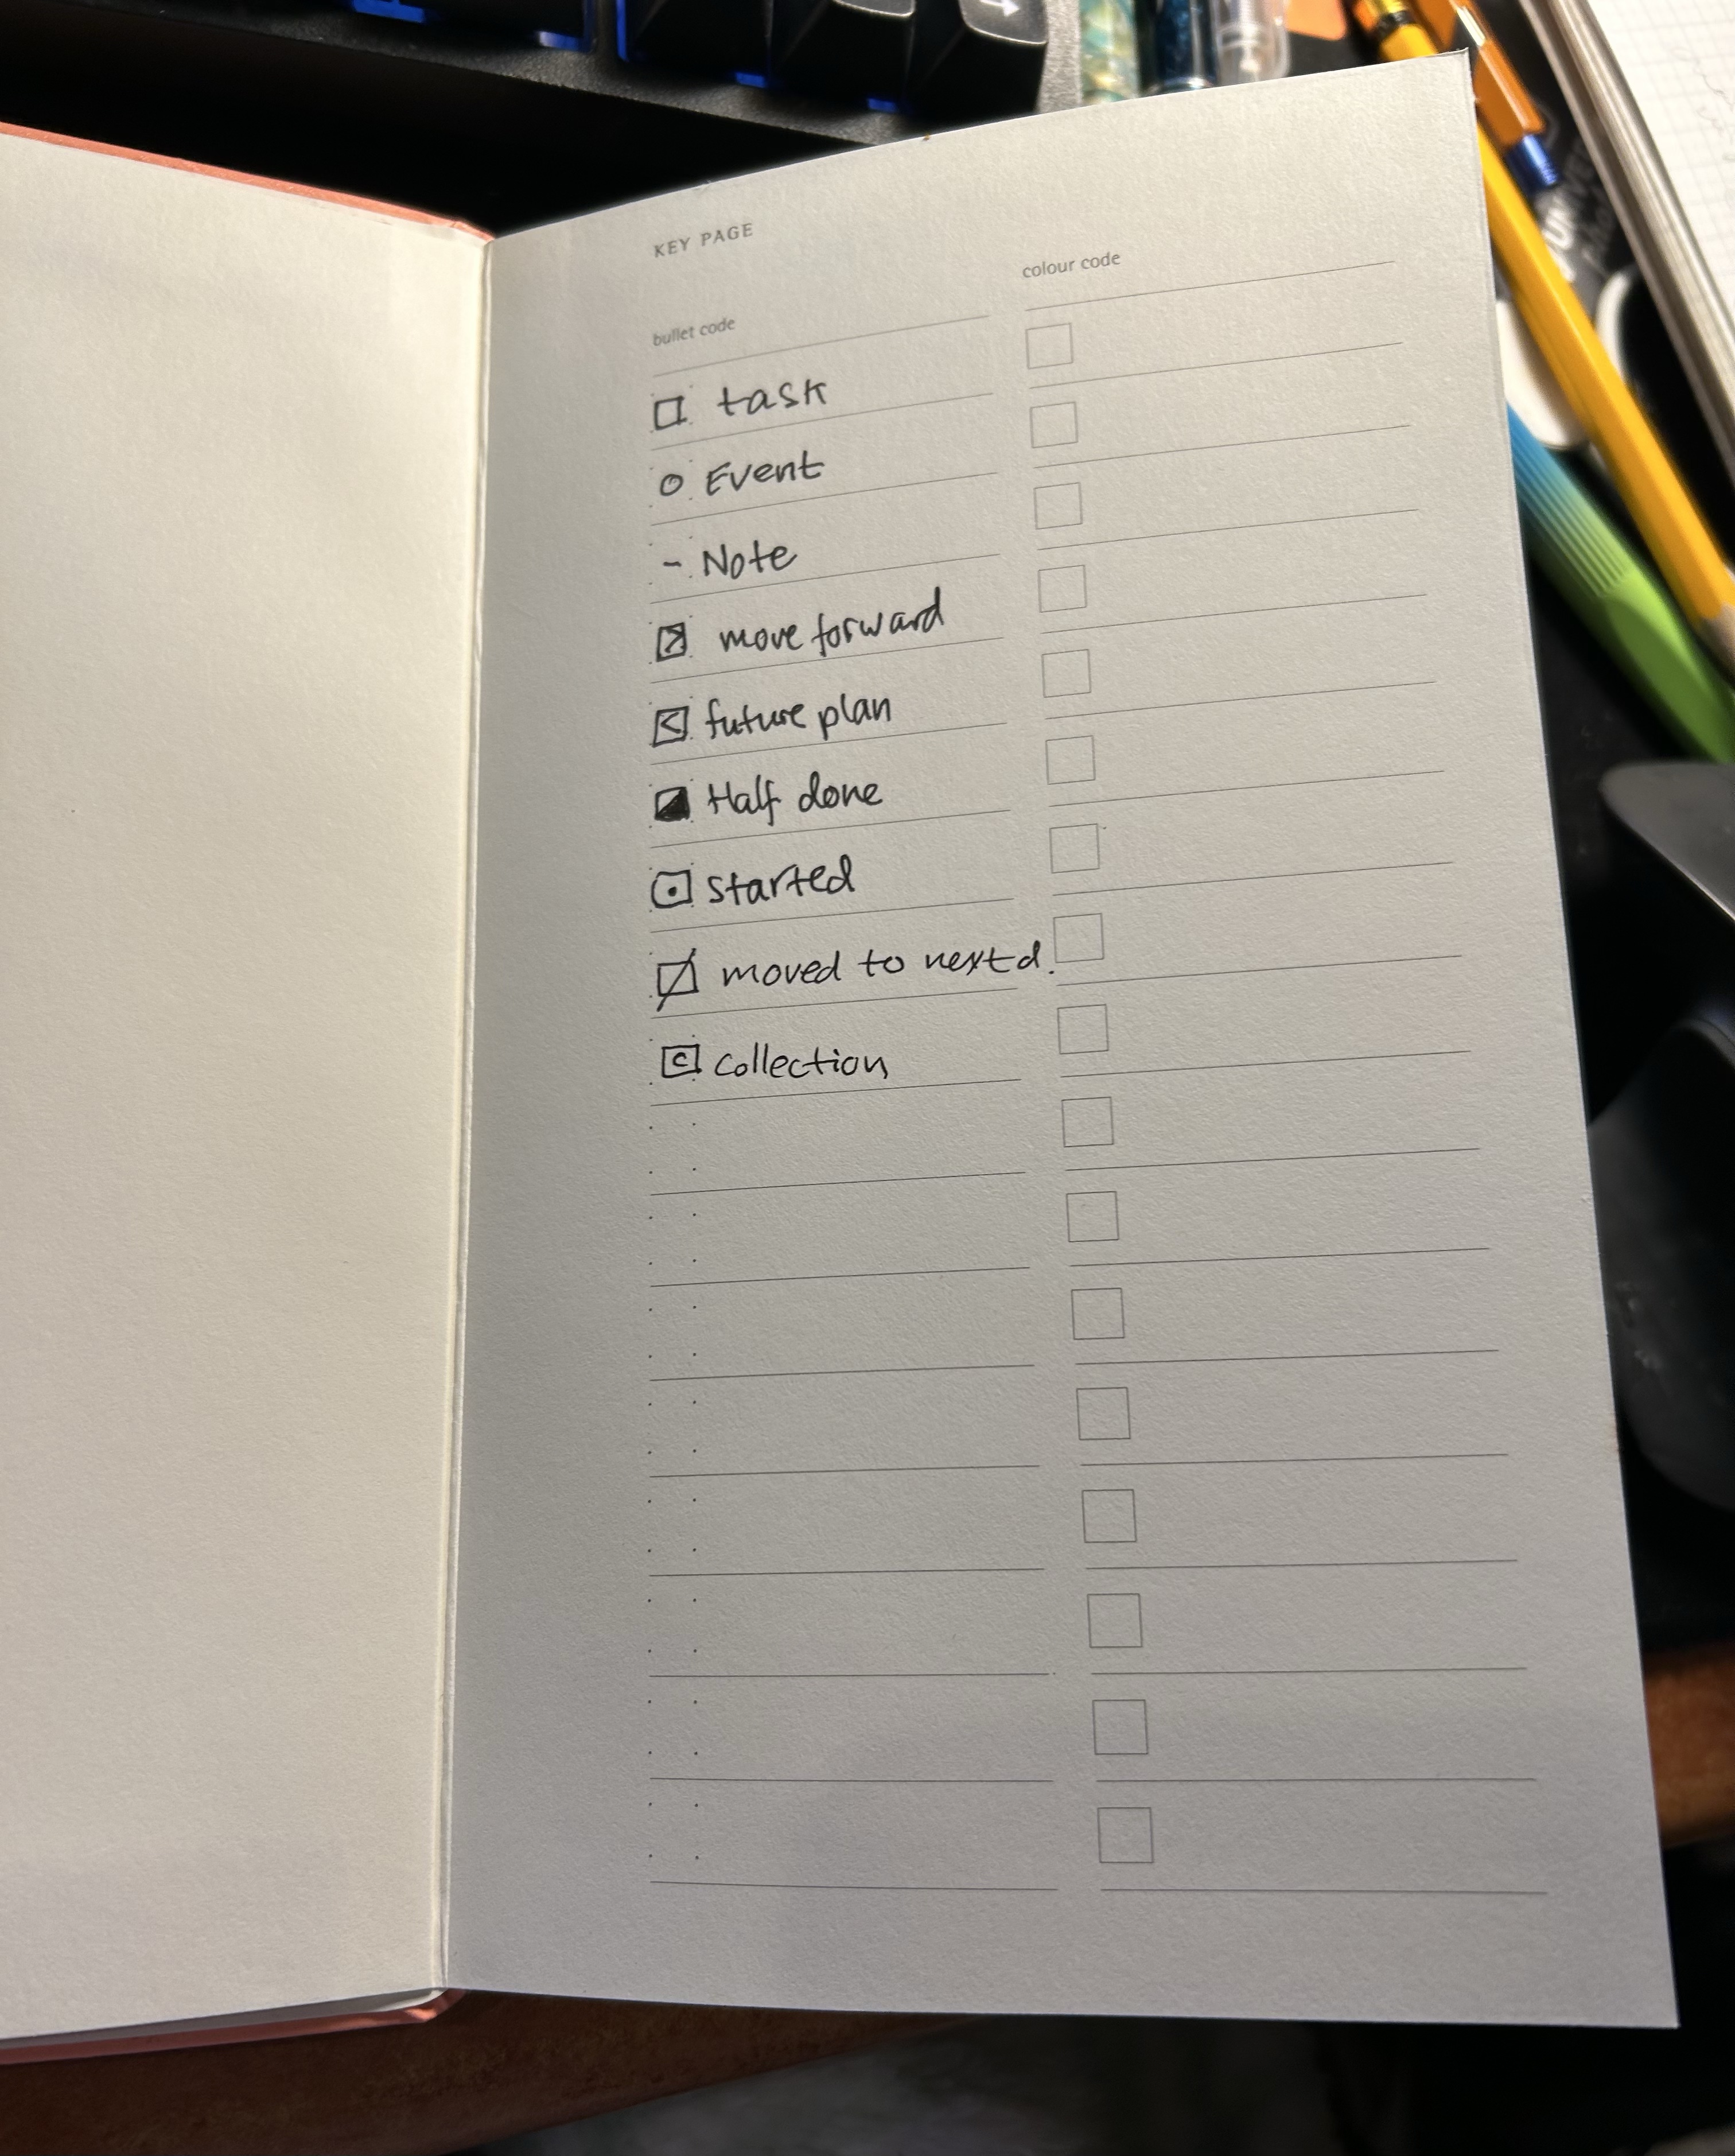 The Best Notebooks To Use For Bullet Journals